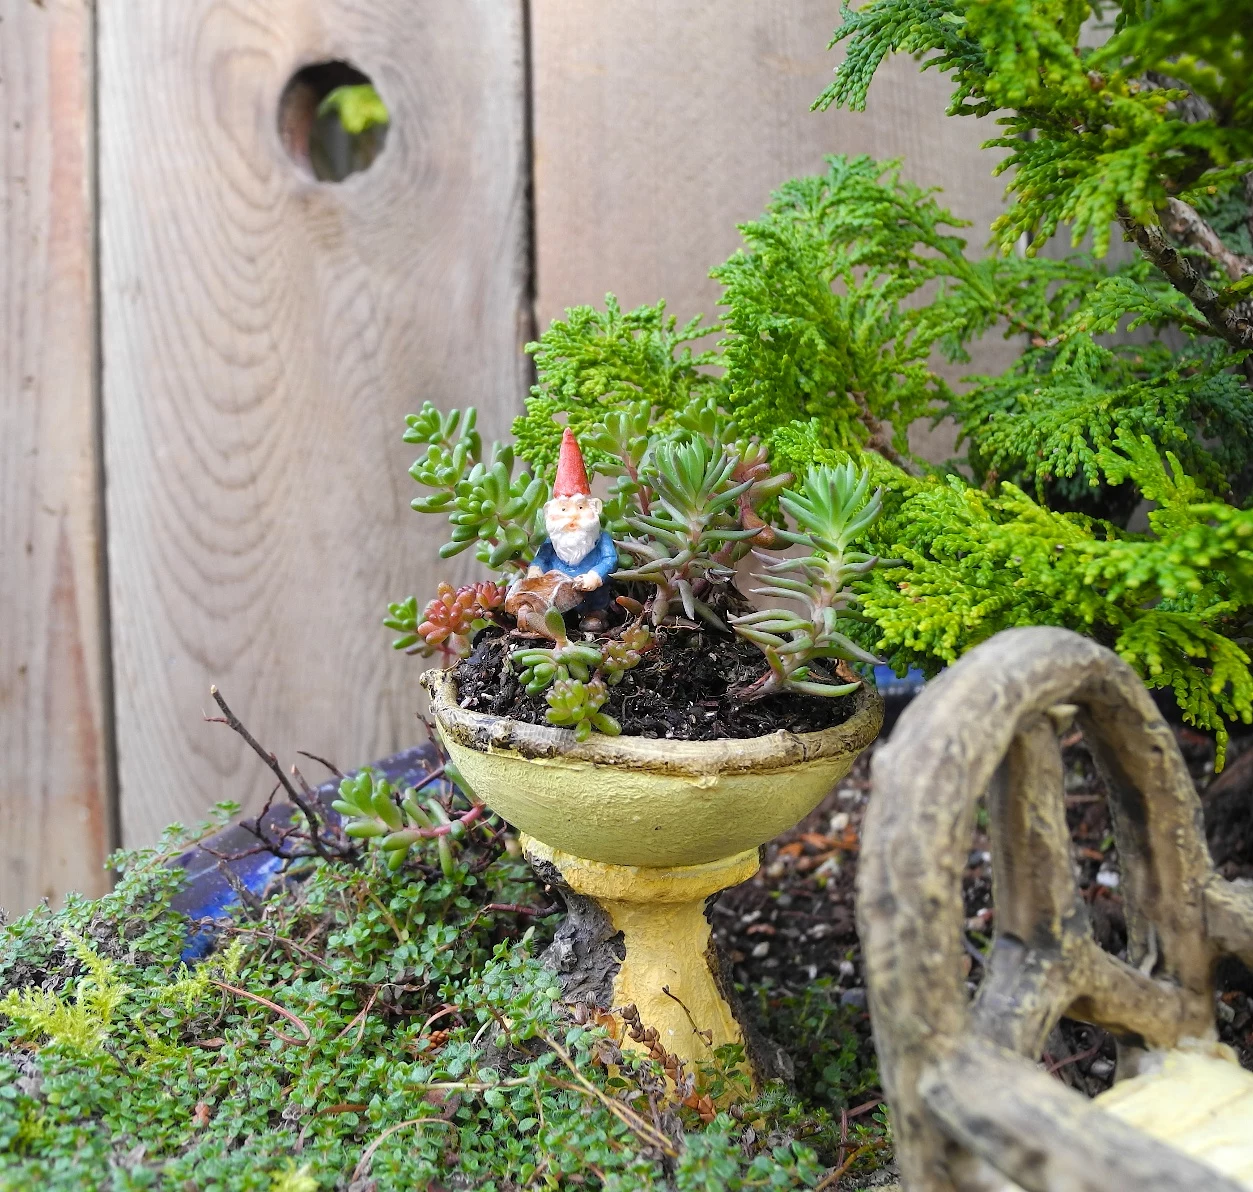 gnome tiny figurine, inside a miniature yellow ceramic dish, seen in close up, succulent fairy garden, placed in a large pot with different plants and ornaments